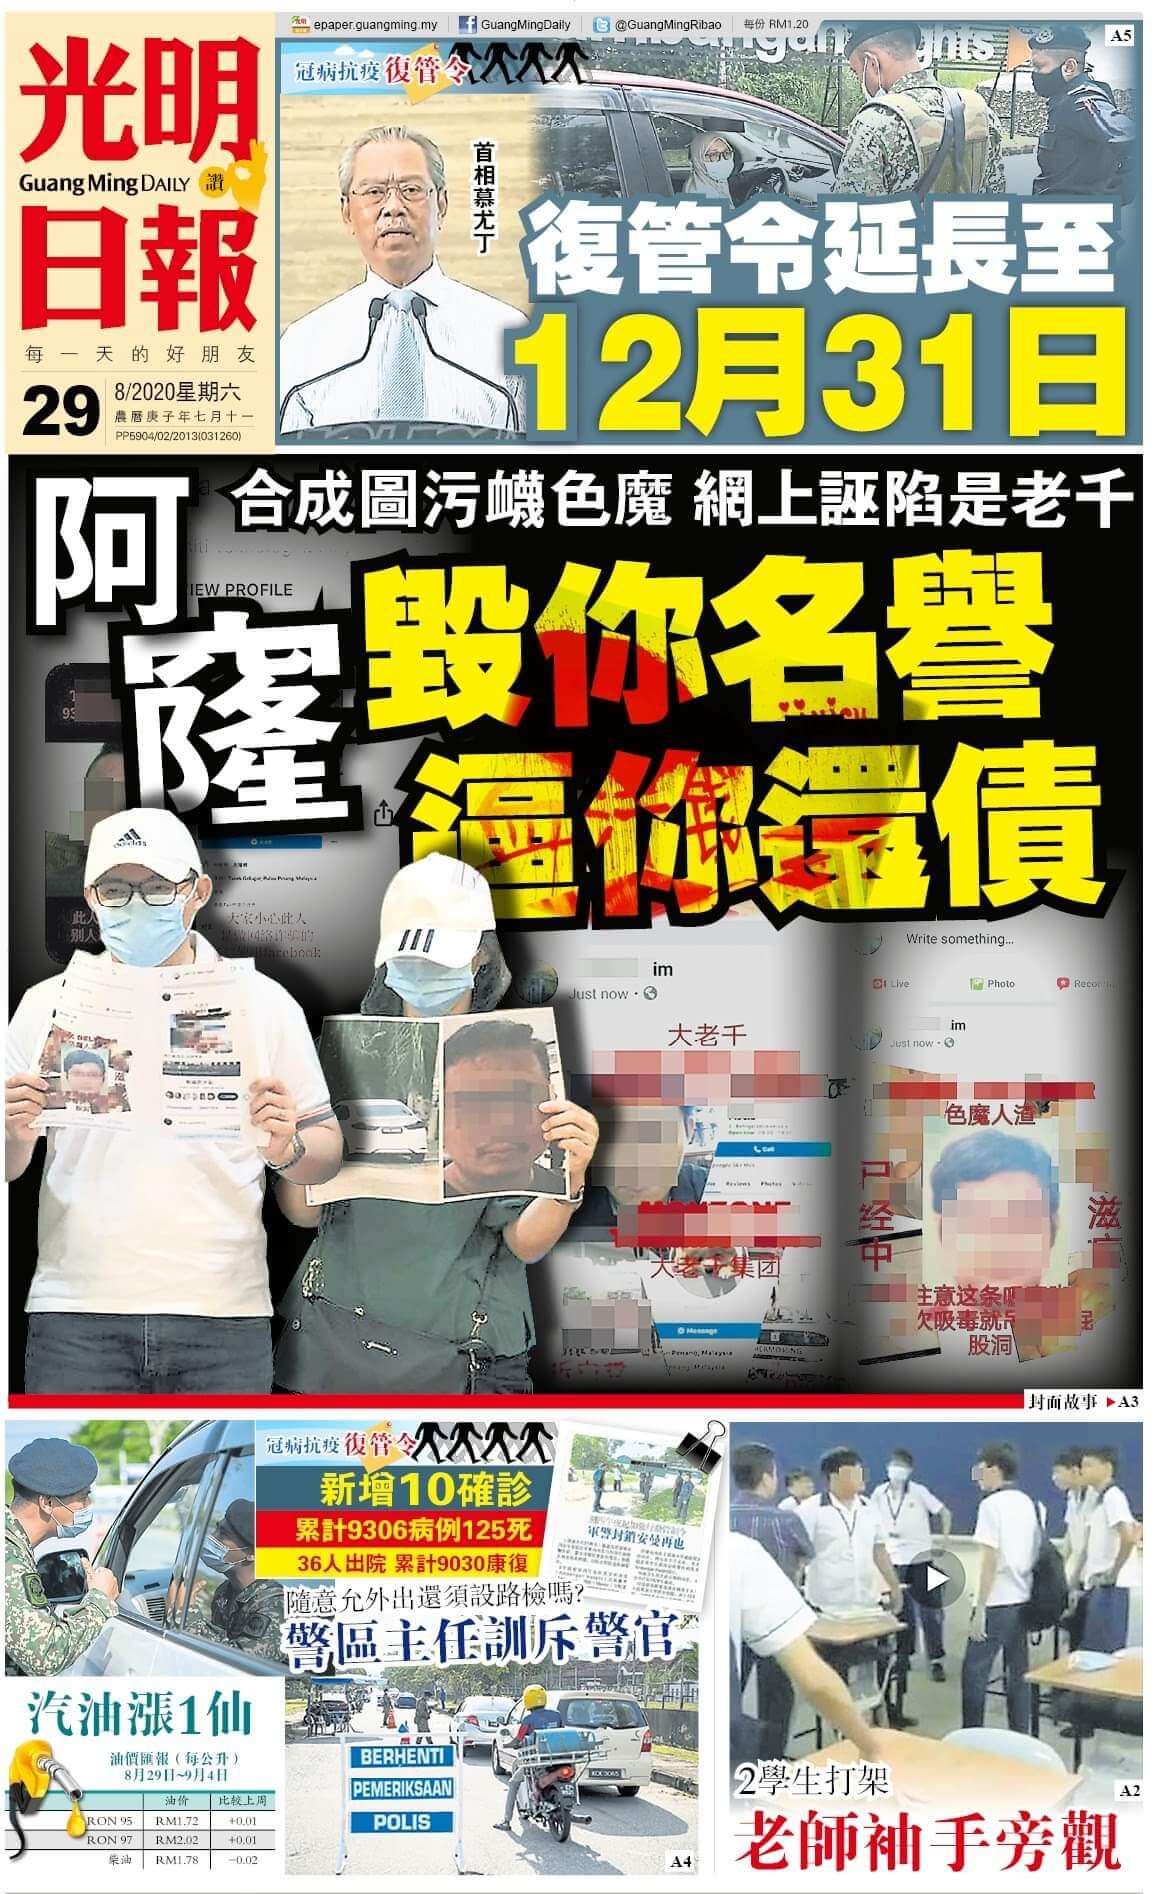 Malaysia Newspapers 17 Guang Ming Daily